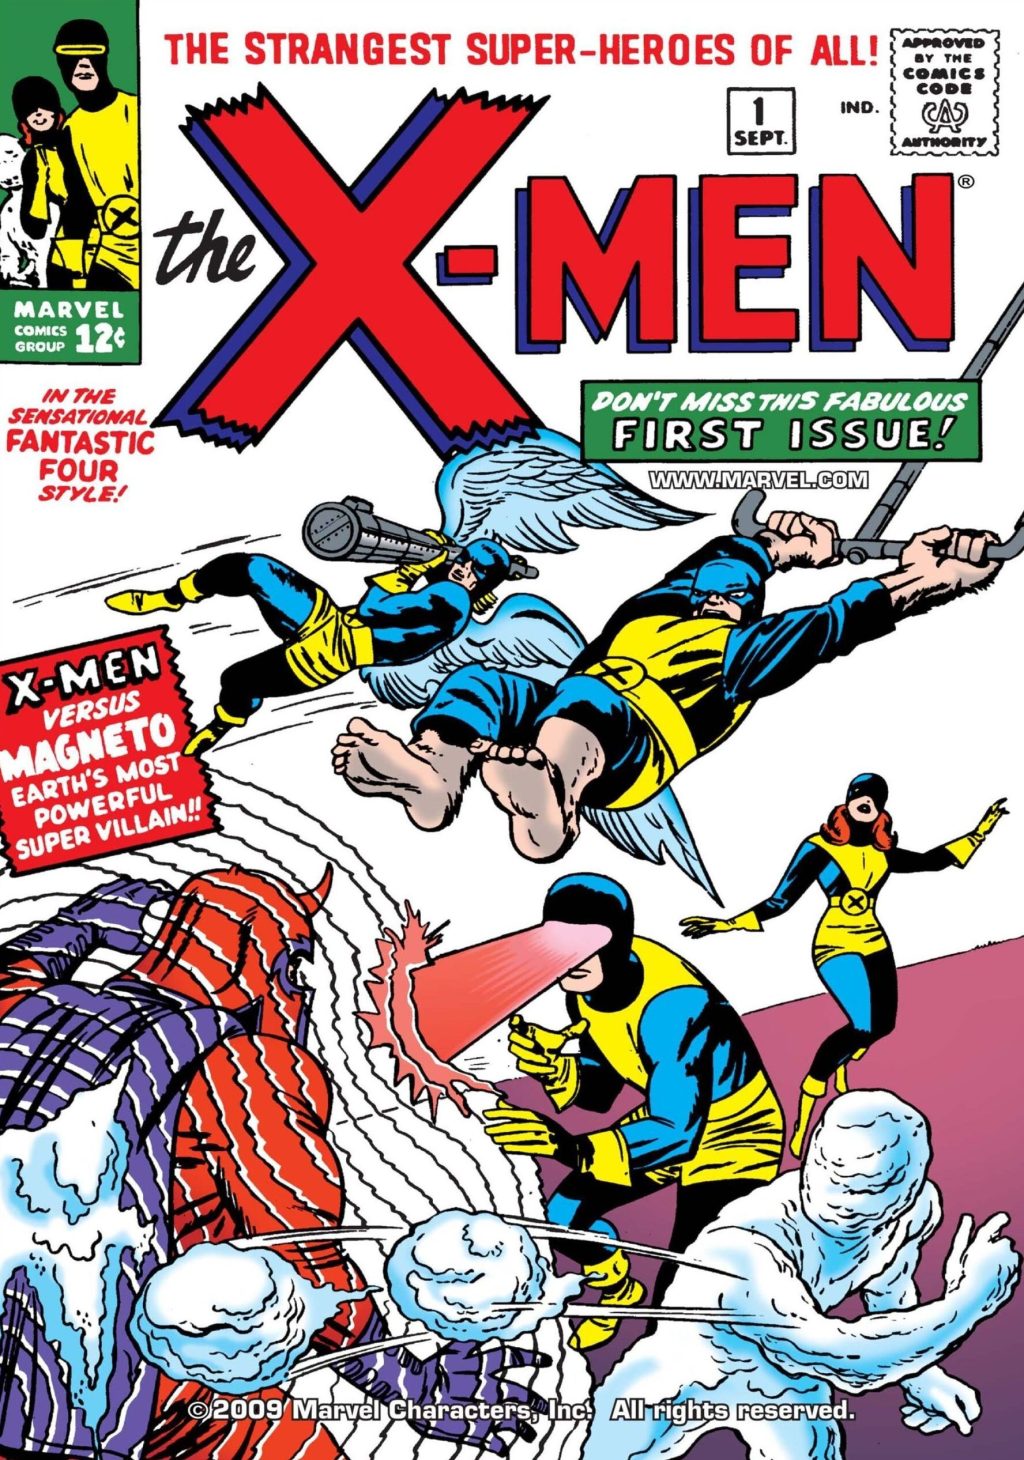 Marvel's Merry Band of Mutants make their debut on Jack Kirby and Sol Brodksy's cover to Uncanny X-Men Vol. 1 #1 "X-Men" (1963), Marvel Comics